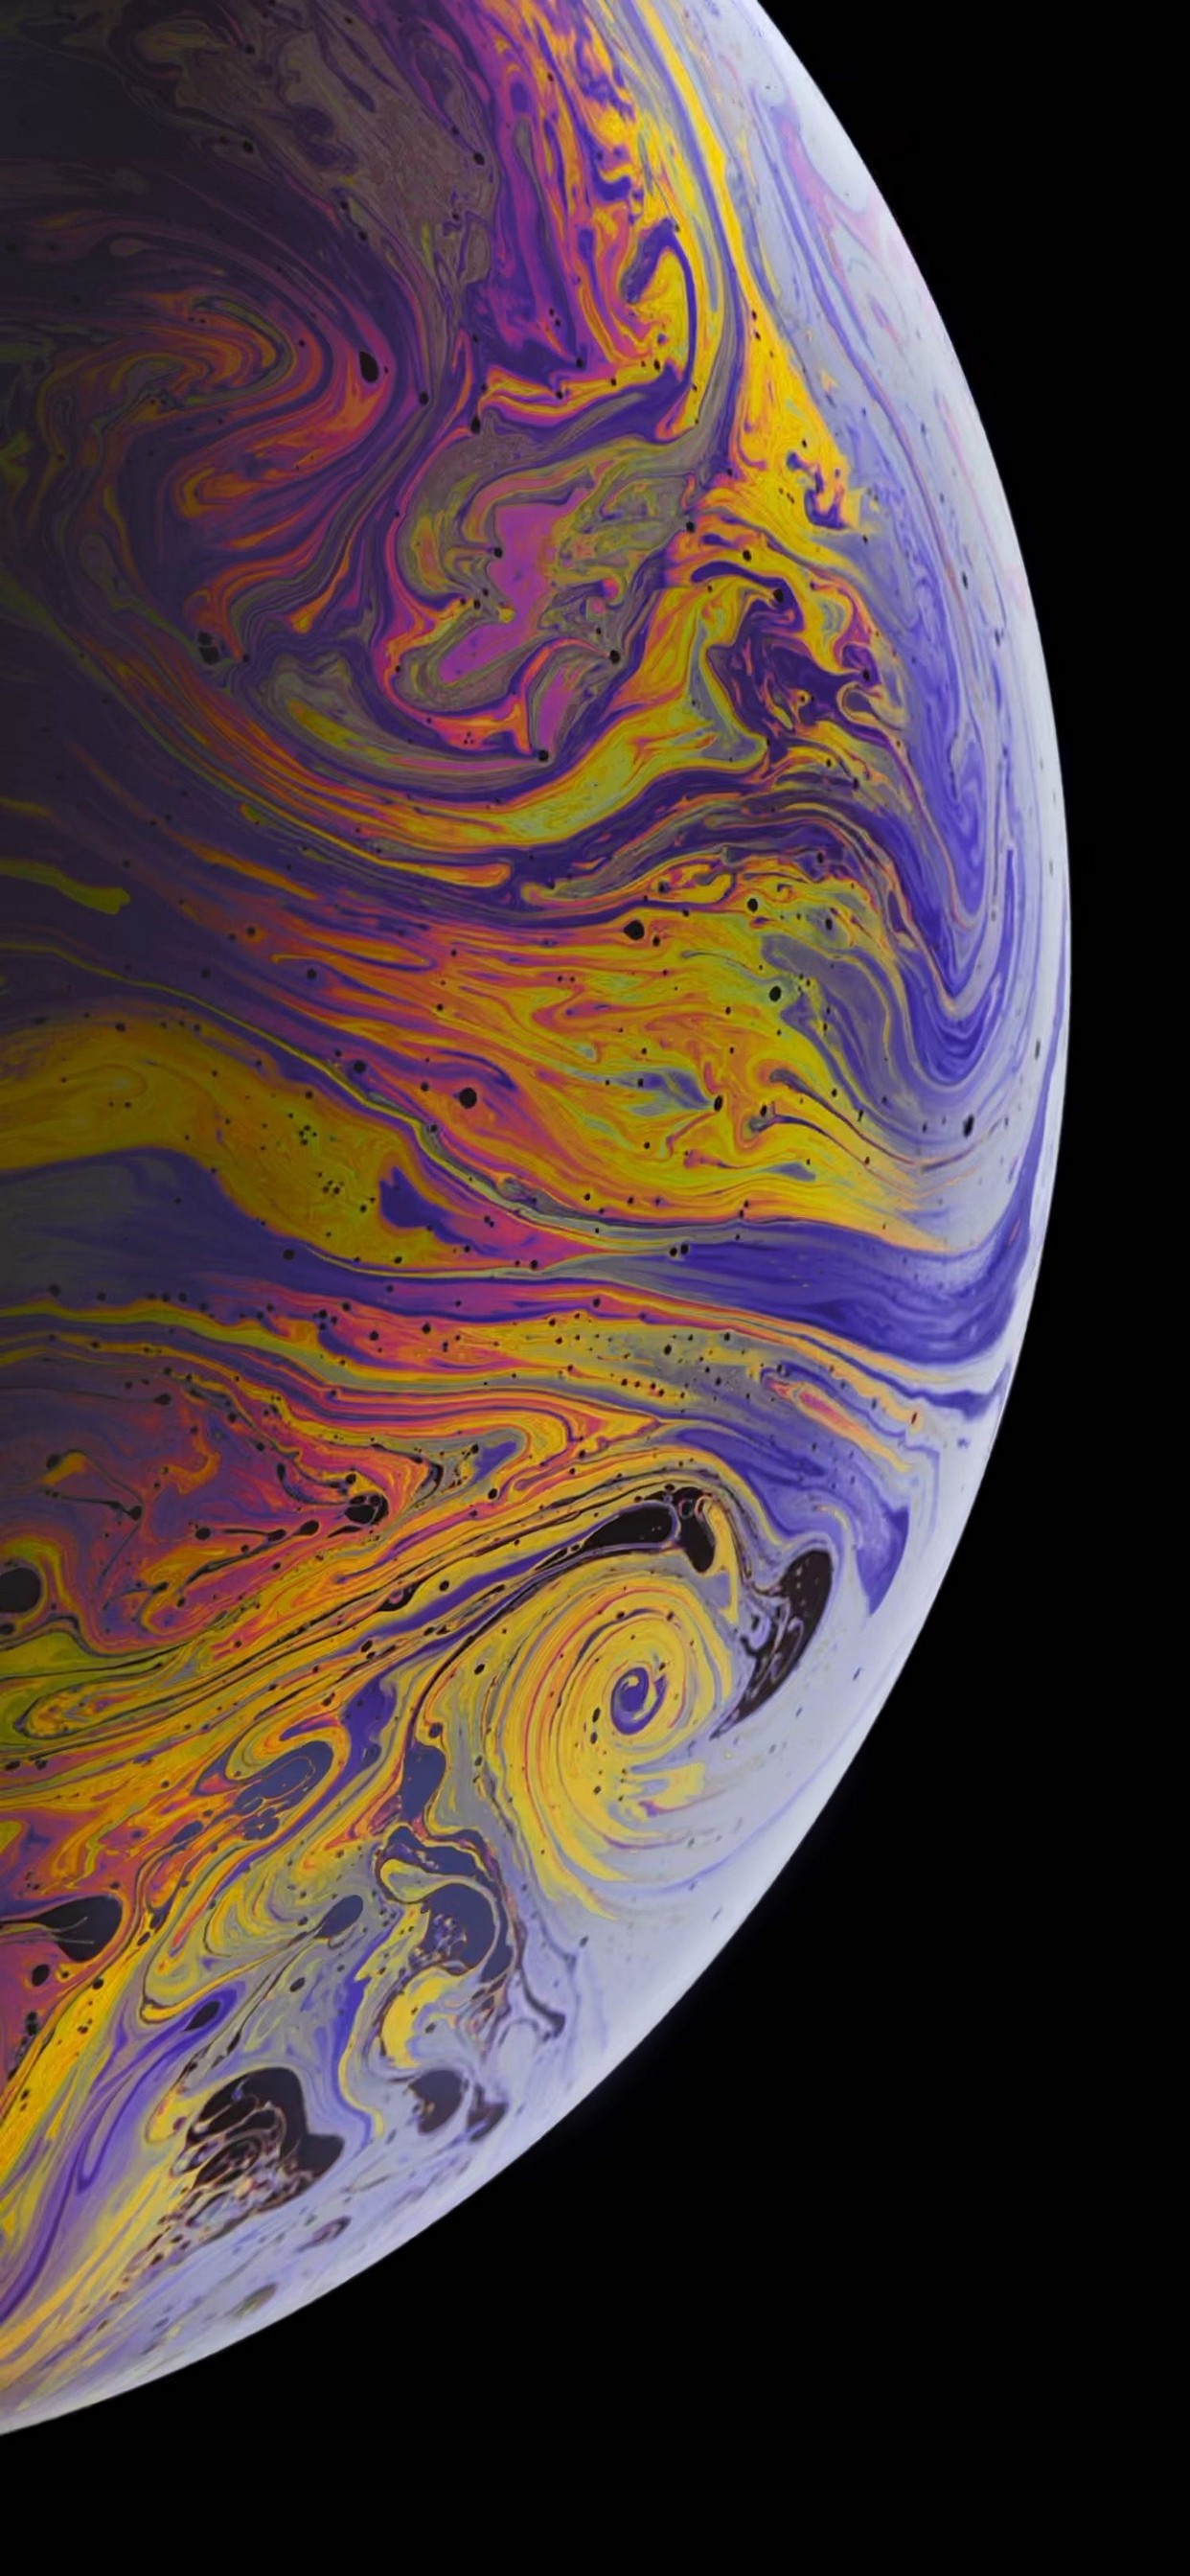 iPhone XS Max Wallpaper in HD With high-resolution 1242X2688 pixel. You can set as wallpaper for Apple iPhone X, XS Max, XR, 8, 7, 6, SE, iPad. Enjoy and share your favorite HD wallpapers and background images